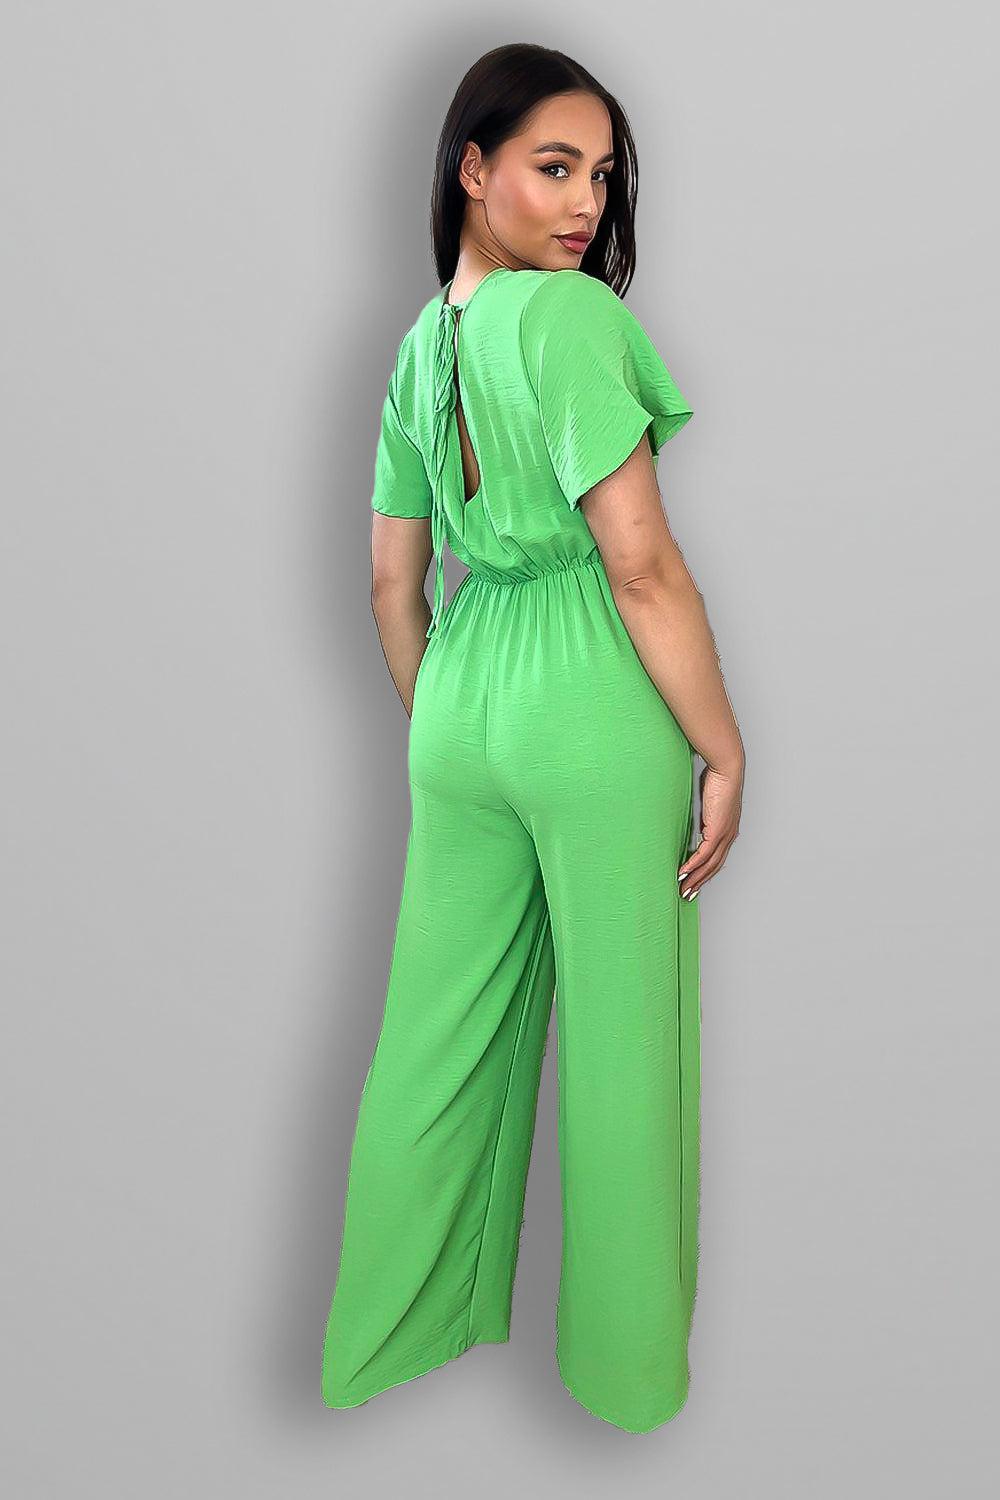 Wing Sleeve V-Neck Palazzo Jumpsuit